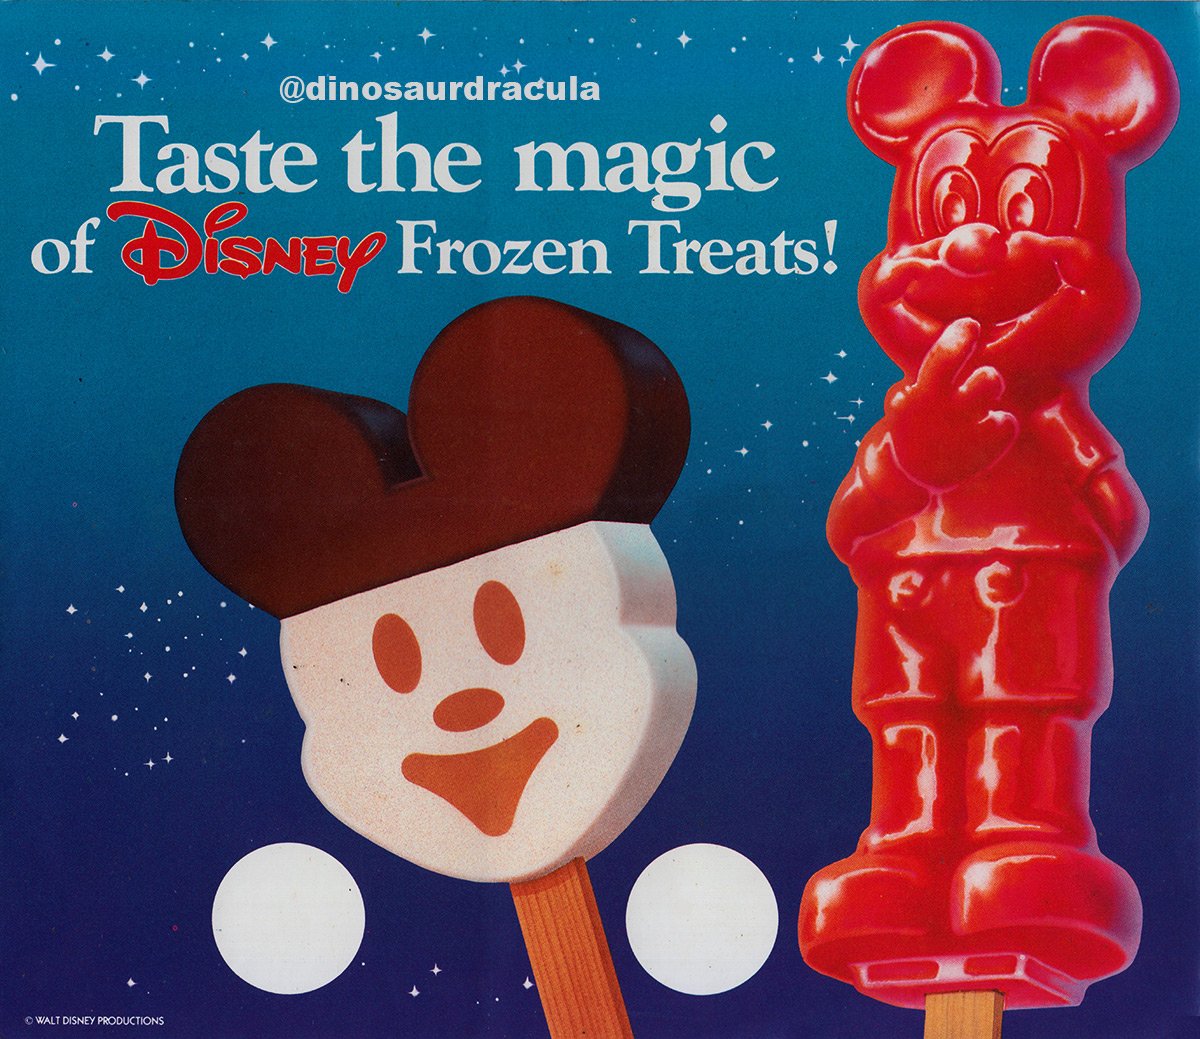 Dinosaur Dracula on Twitter: "Those Mickey Mouse Bars good, but Mickey's Parade Pops were quite possibly the best popsicles I've ever had. Those characters weren't with "mouthfeel" in mind,